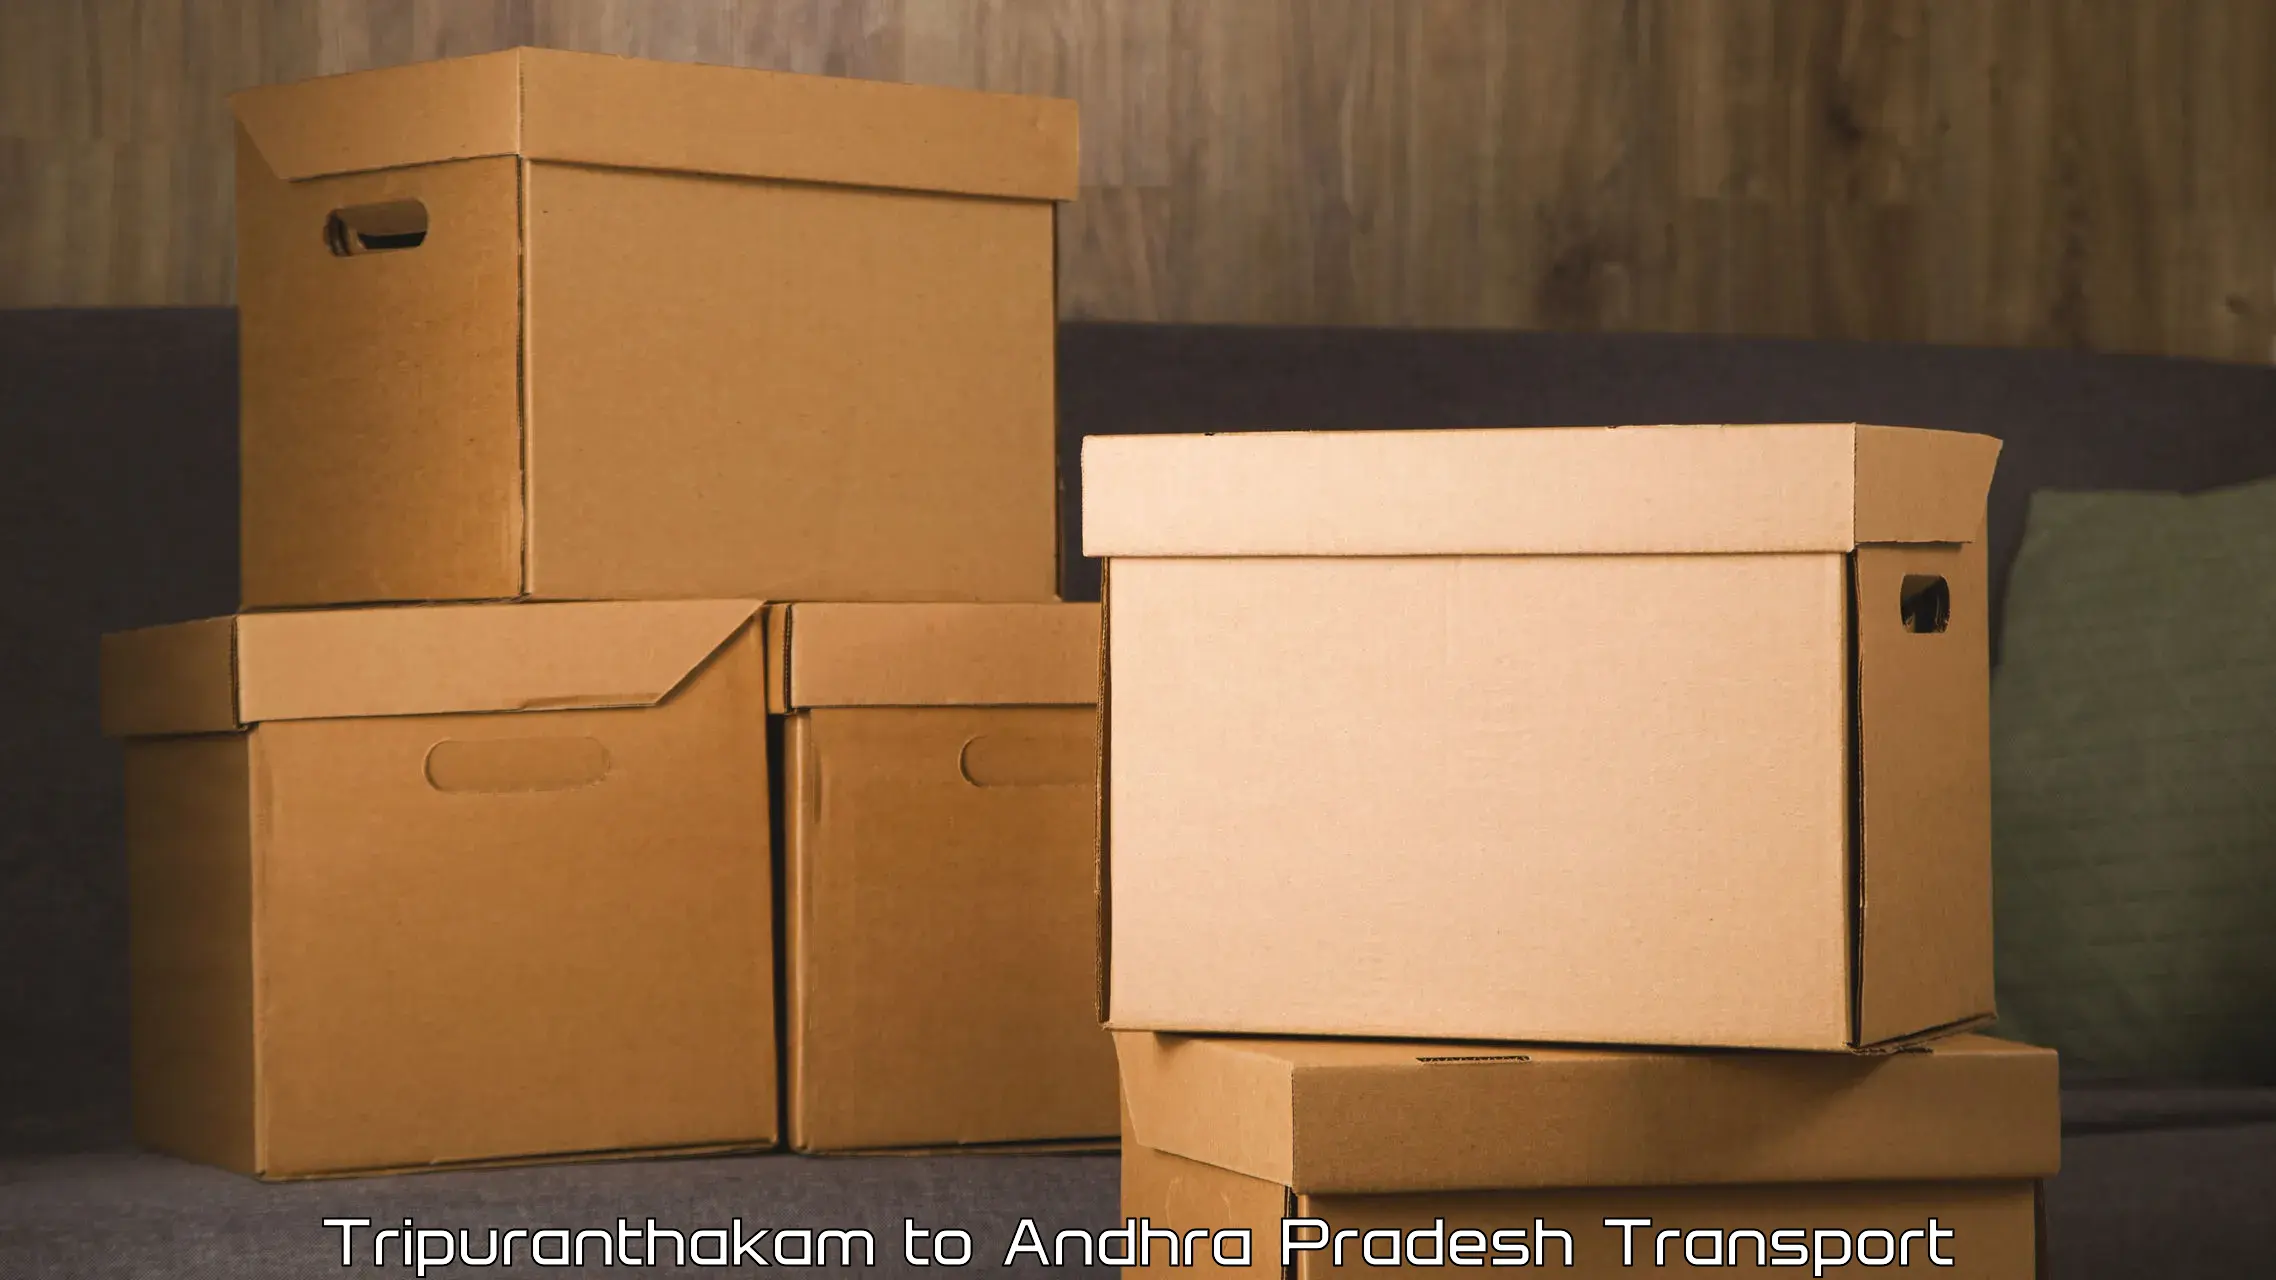 Vehicle transport services in Tripuranthakam to Ongole